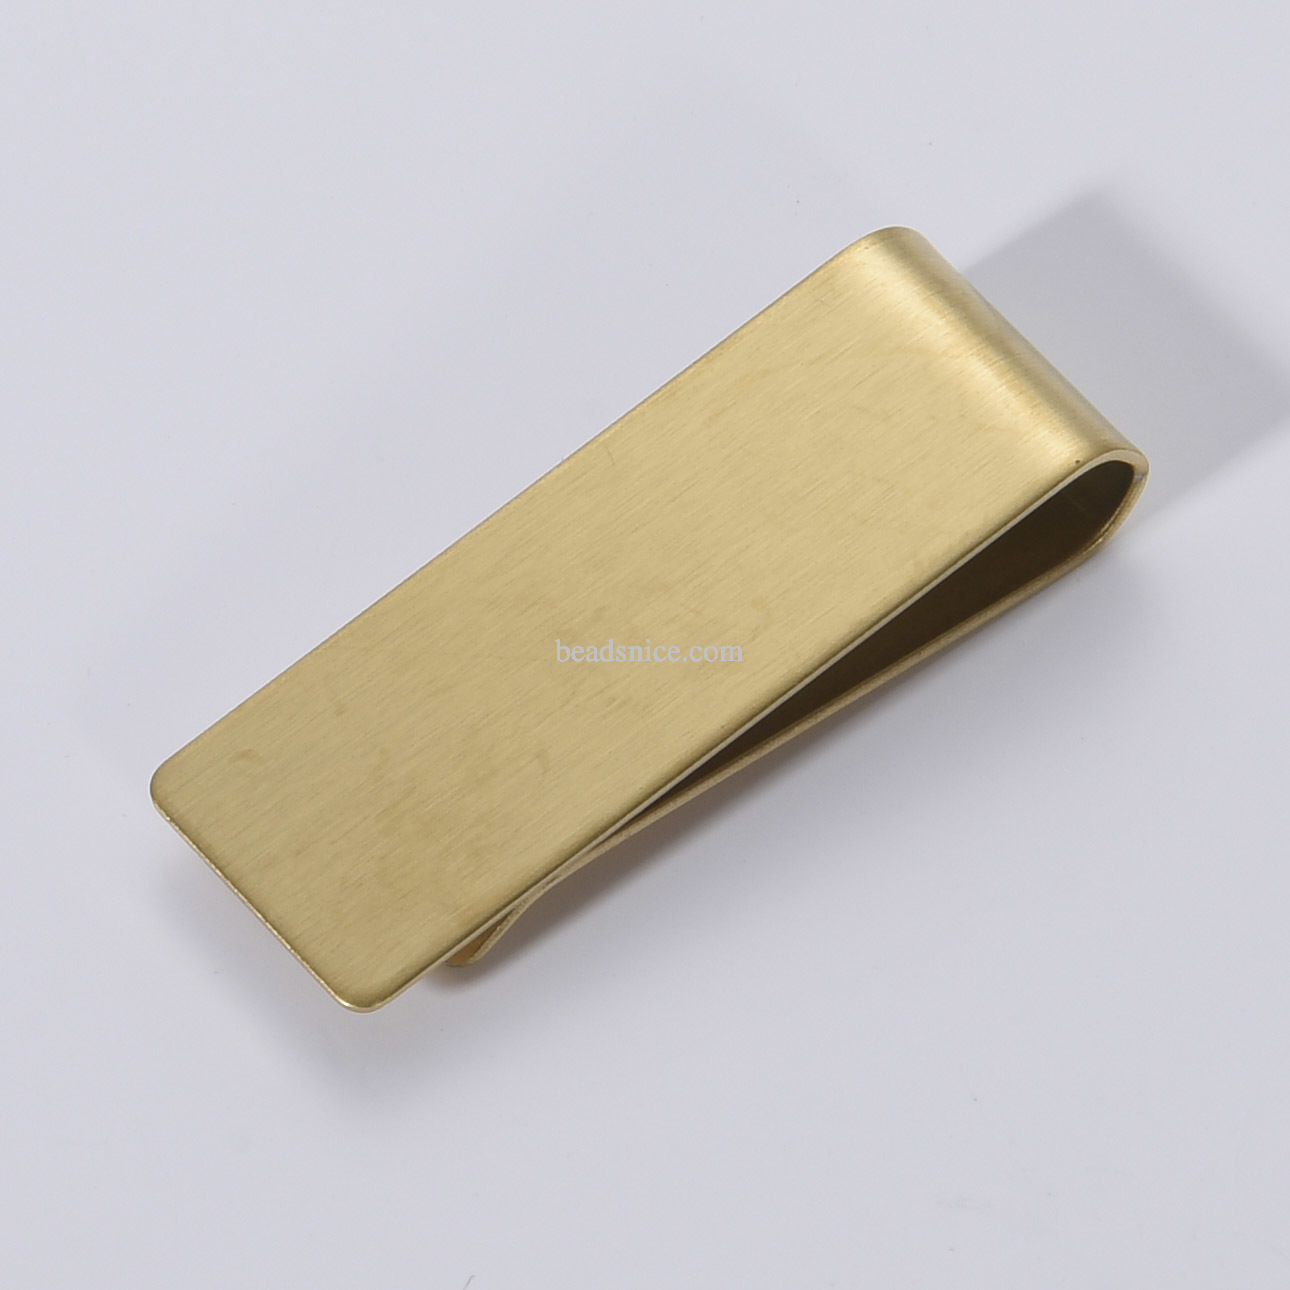 Stainless Steel Money Clip Jewelry Findings Fashion Design Clip Perfect for Father's Day Gift